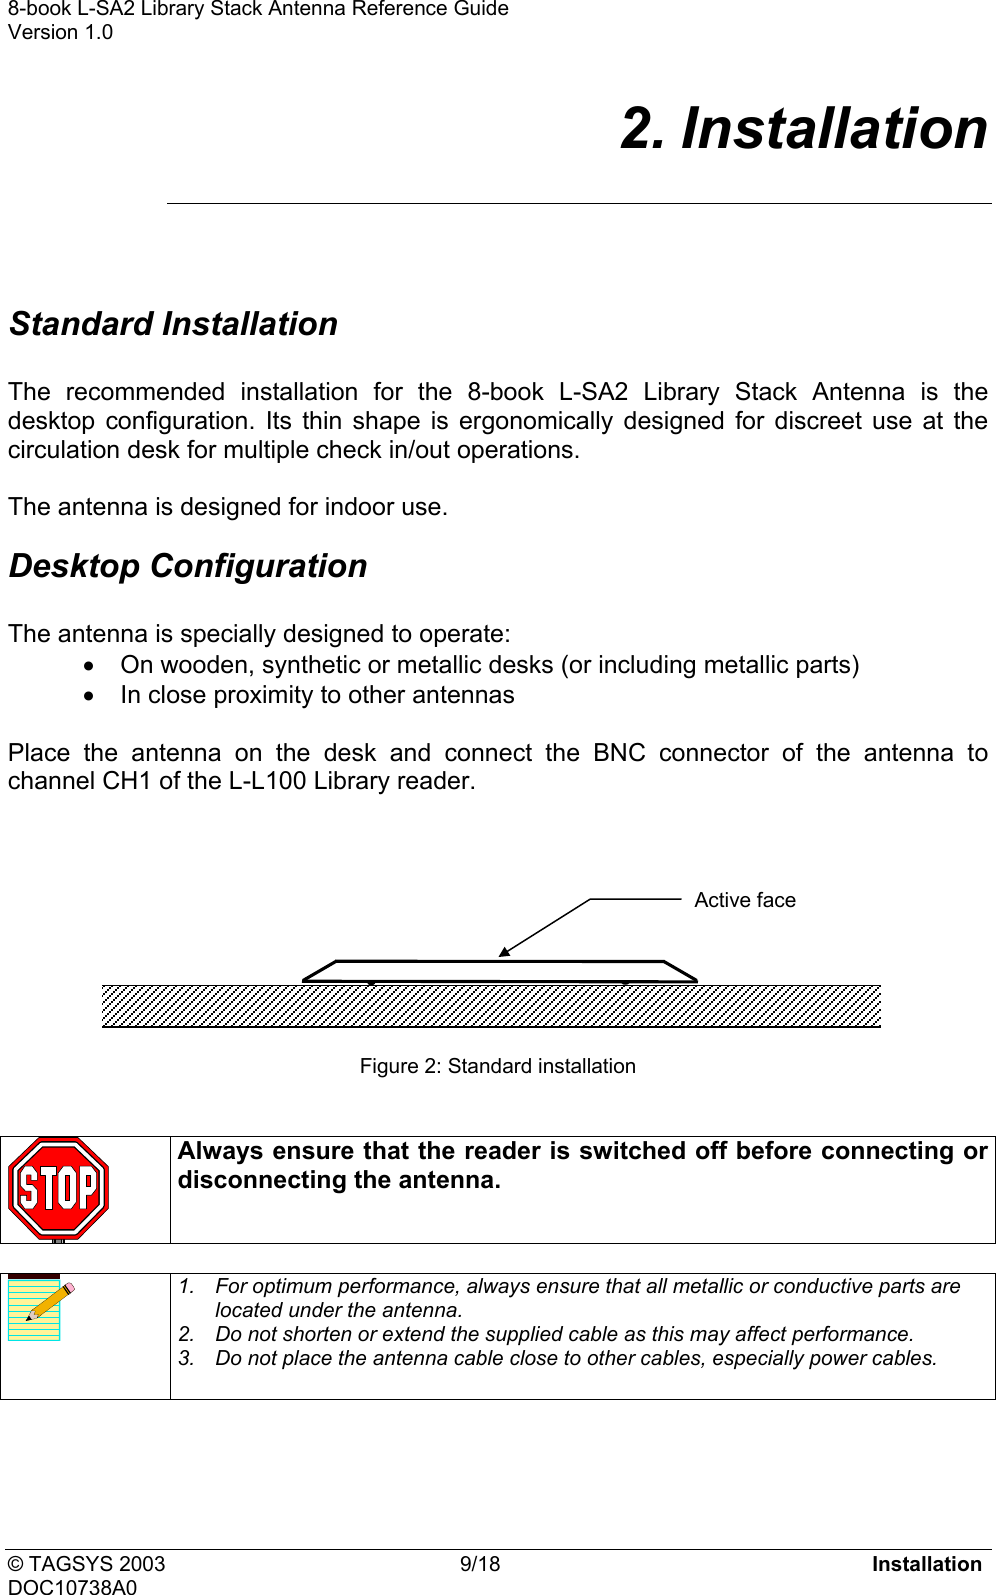 8-book L-SA2 Library Stack Antenna Reference Guide    Version 1.0 2. Installation  Standard Installation  The recommended installation for the 8-book L-SA2 Library Stack Antenna is the desktop configuration. Its thin shape is ergonomically designed for discreet use at the circulation desk for multiple check in/out operations.  The antenna is designed for indoor use. Desktop Configuration  The antenna is specially designed to operate: •  On wooden, synthetic or metallic desks (or including metallic parts) •  In close proximity to other antennas  Place the antenna on the desk and connect the BNC connector of the antenna to channel CH1 of the L-L100 Library reader.     Active face      Figure 2: Standard installation    Always ensure that the reader is switched off before connecting or disconnecting the antenna.    1.  For optimum performance, always ensure that all metallic or conductive parts are located under the antenna. 2.  Do not shorten or extend the supplied cable as this may affect performance. 3.  Do not place the antenna cable close to other cables, especially power cables.    © TAGSYS 2003  9/18  Installation DOC10738A0 